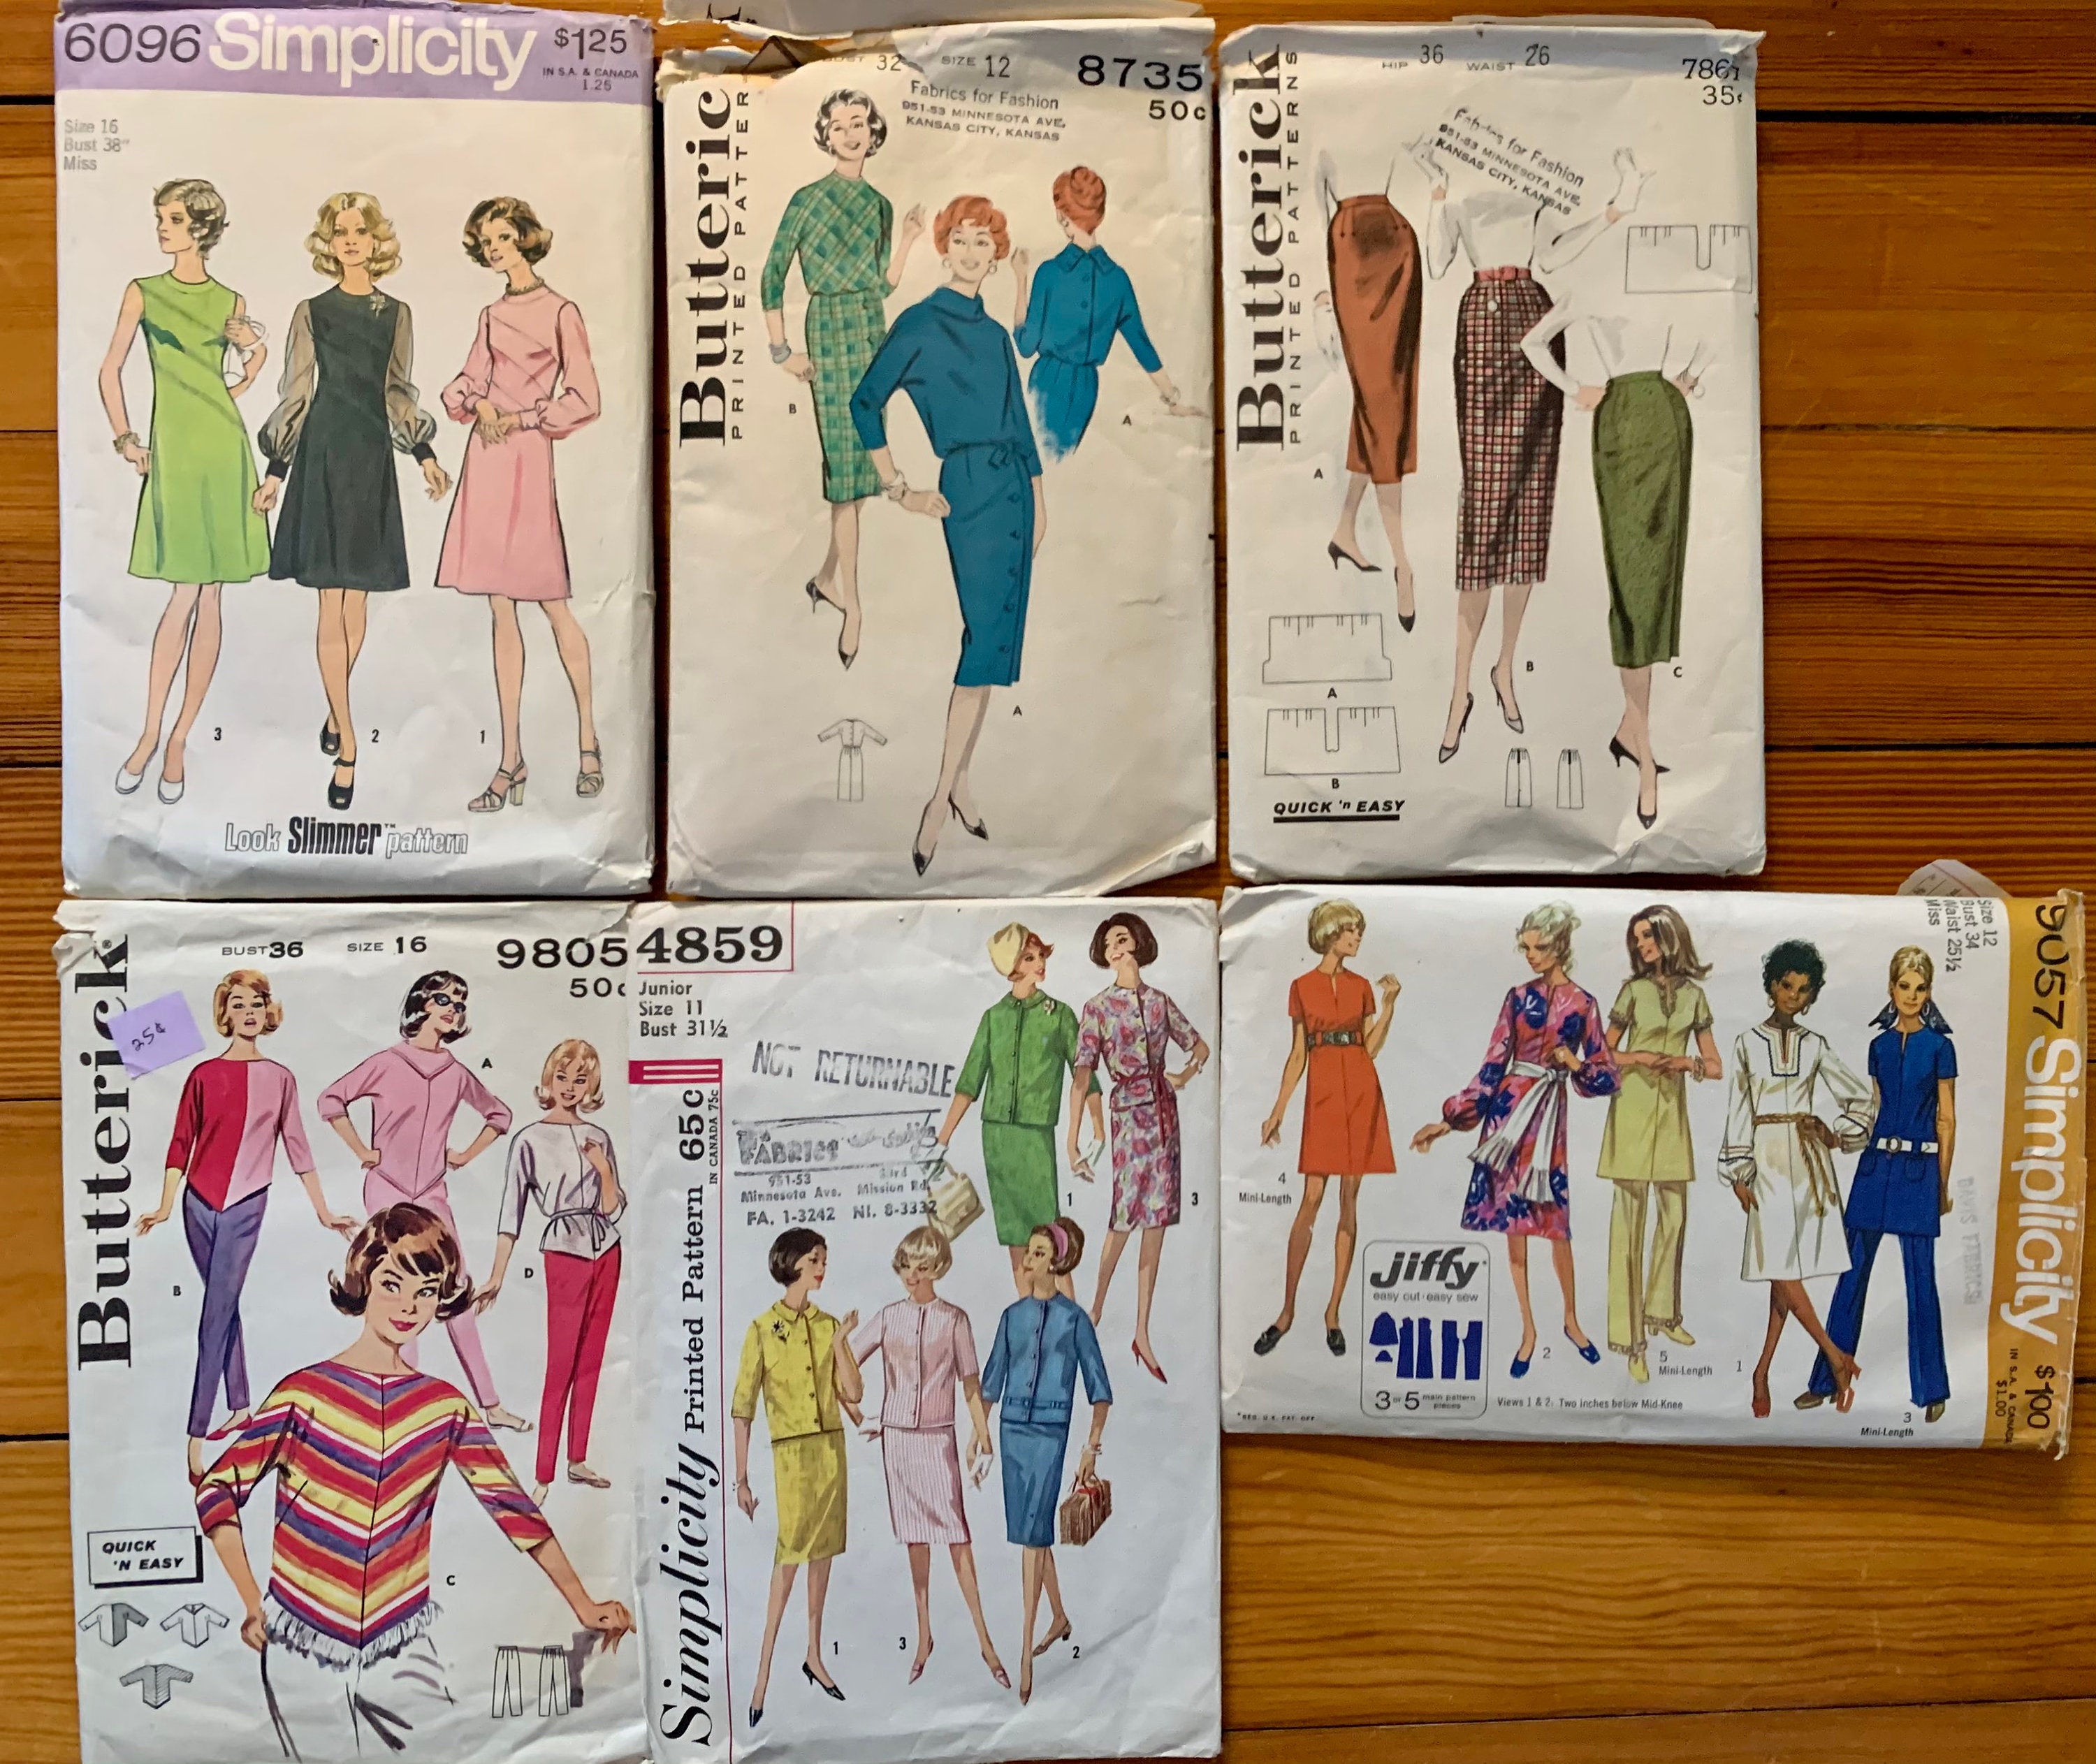 Vintage Sewing 50s 60s 70s Simplicity and Butterick | Etsy